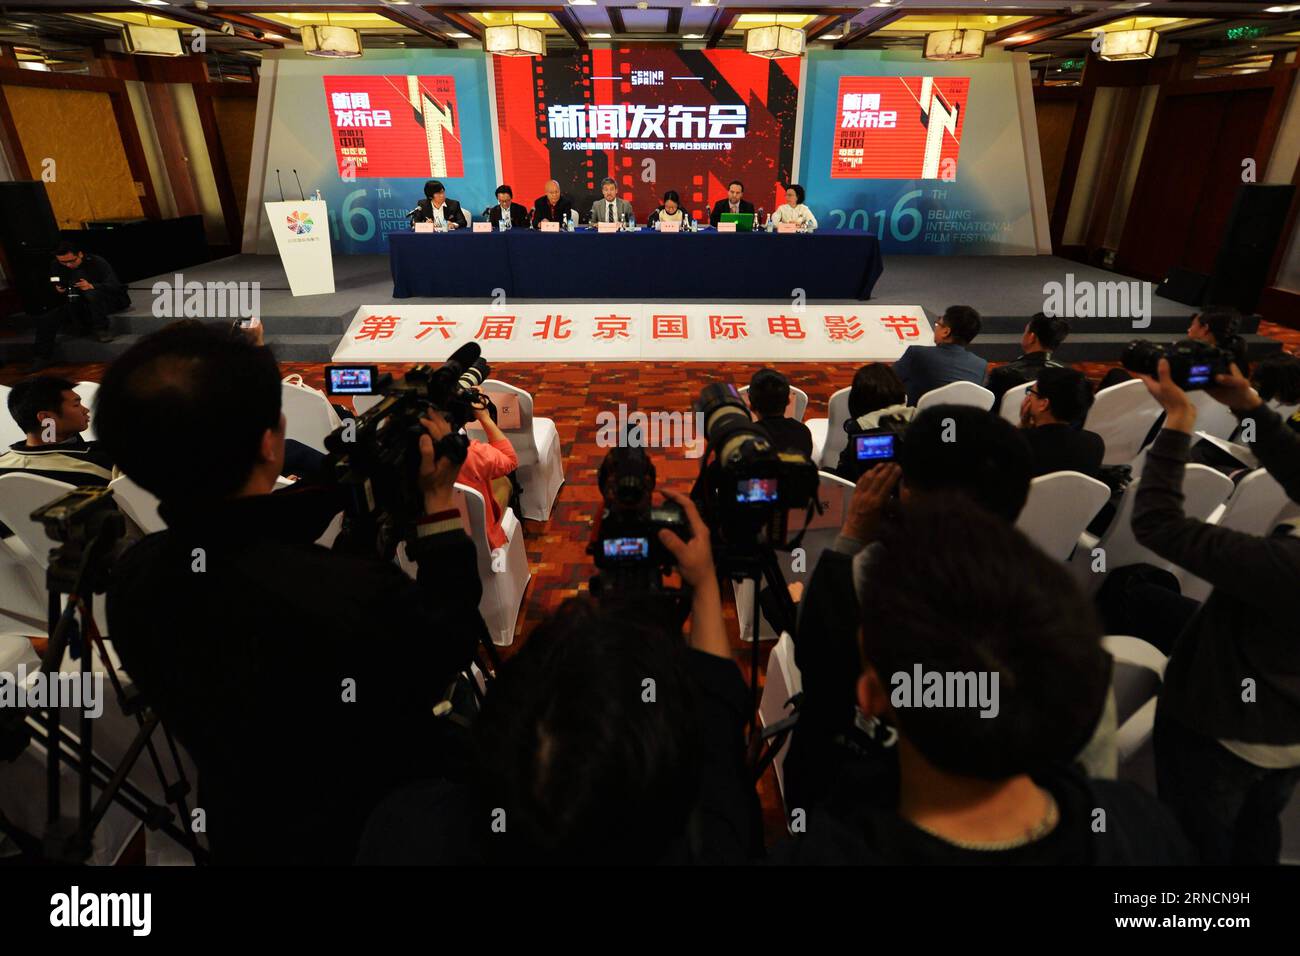 (160417) -- BEIJING, April 17, 2016 -- A press conference of the first Sino-Spanish film culture exchange project is held in Beijing, capital of China, April 17, 2016. According to the project, ten Chinese films will be shown during the first Sino-Spanish film week in majors cities of Spain s Andalucia region in November of 2016. Moreover, the Barcelona government will invite Chinese young directors for a one-month shooting project with Spanish directors. )(wjq) CHINA-BEIJING-SINO-SPANISH FILM CULTURE EXCHANGE PROJECT-PRESS CONFERENCE (CN) ChenxBin PUBLICATIONxNOTxINxCHN   160417 Beijing April Stock Photo